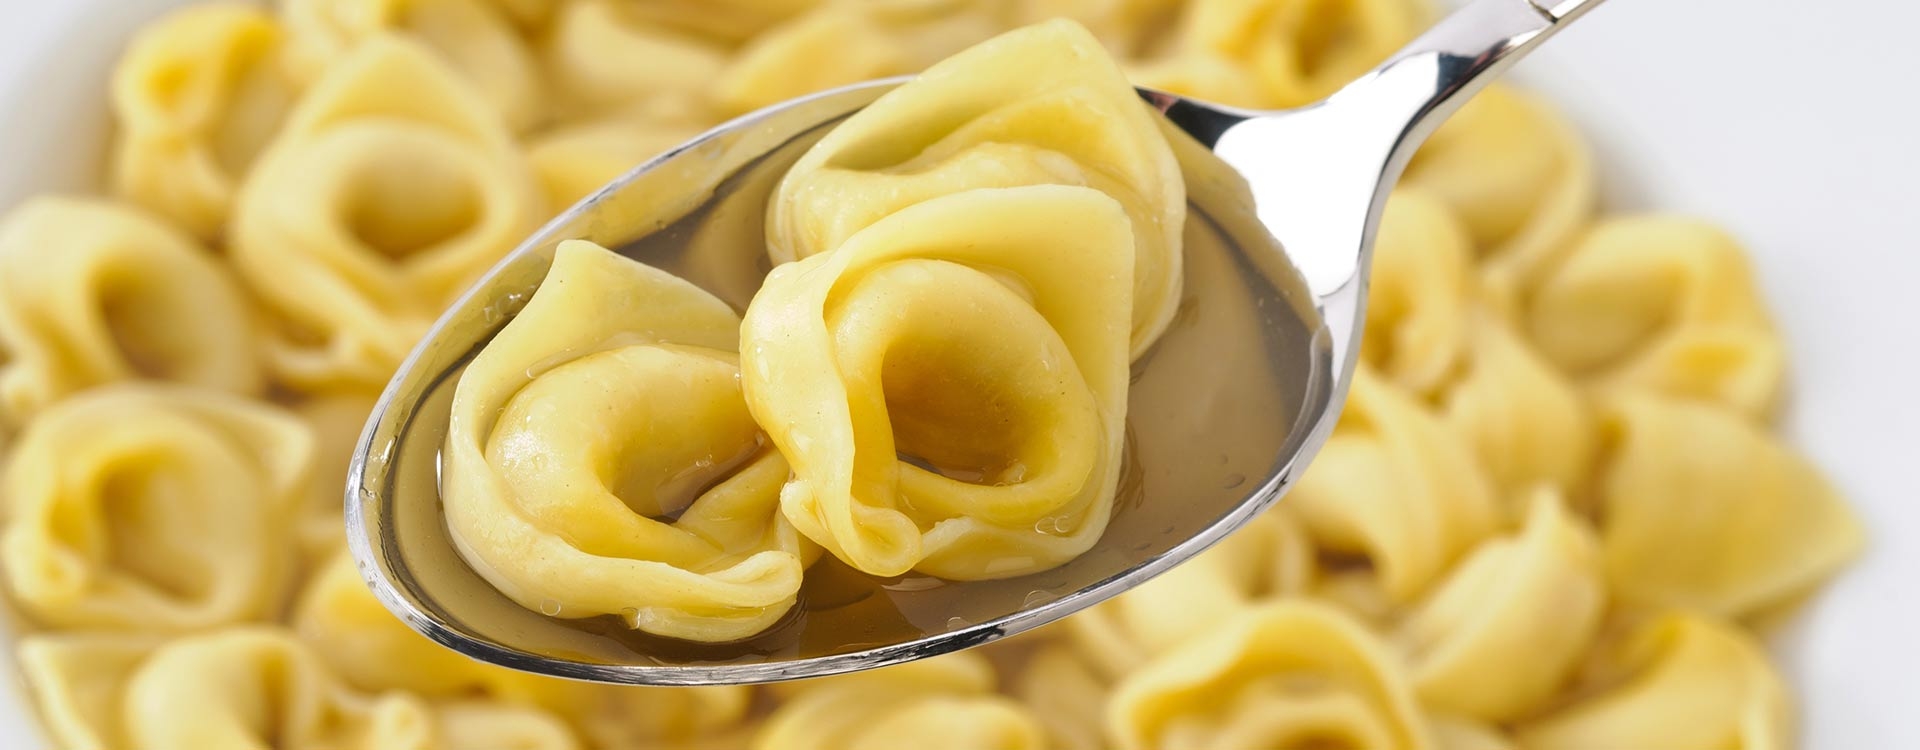 Tortellini: the must-have, Christmas pasta dish